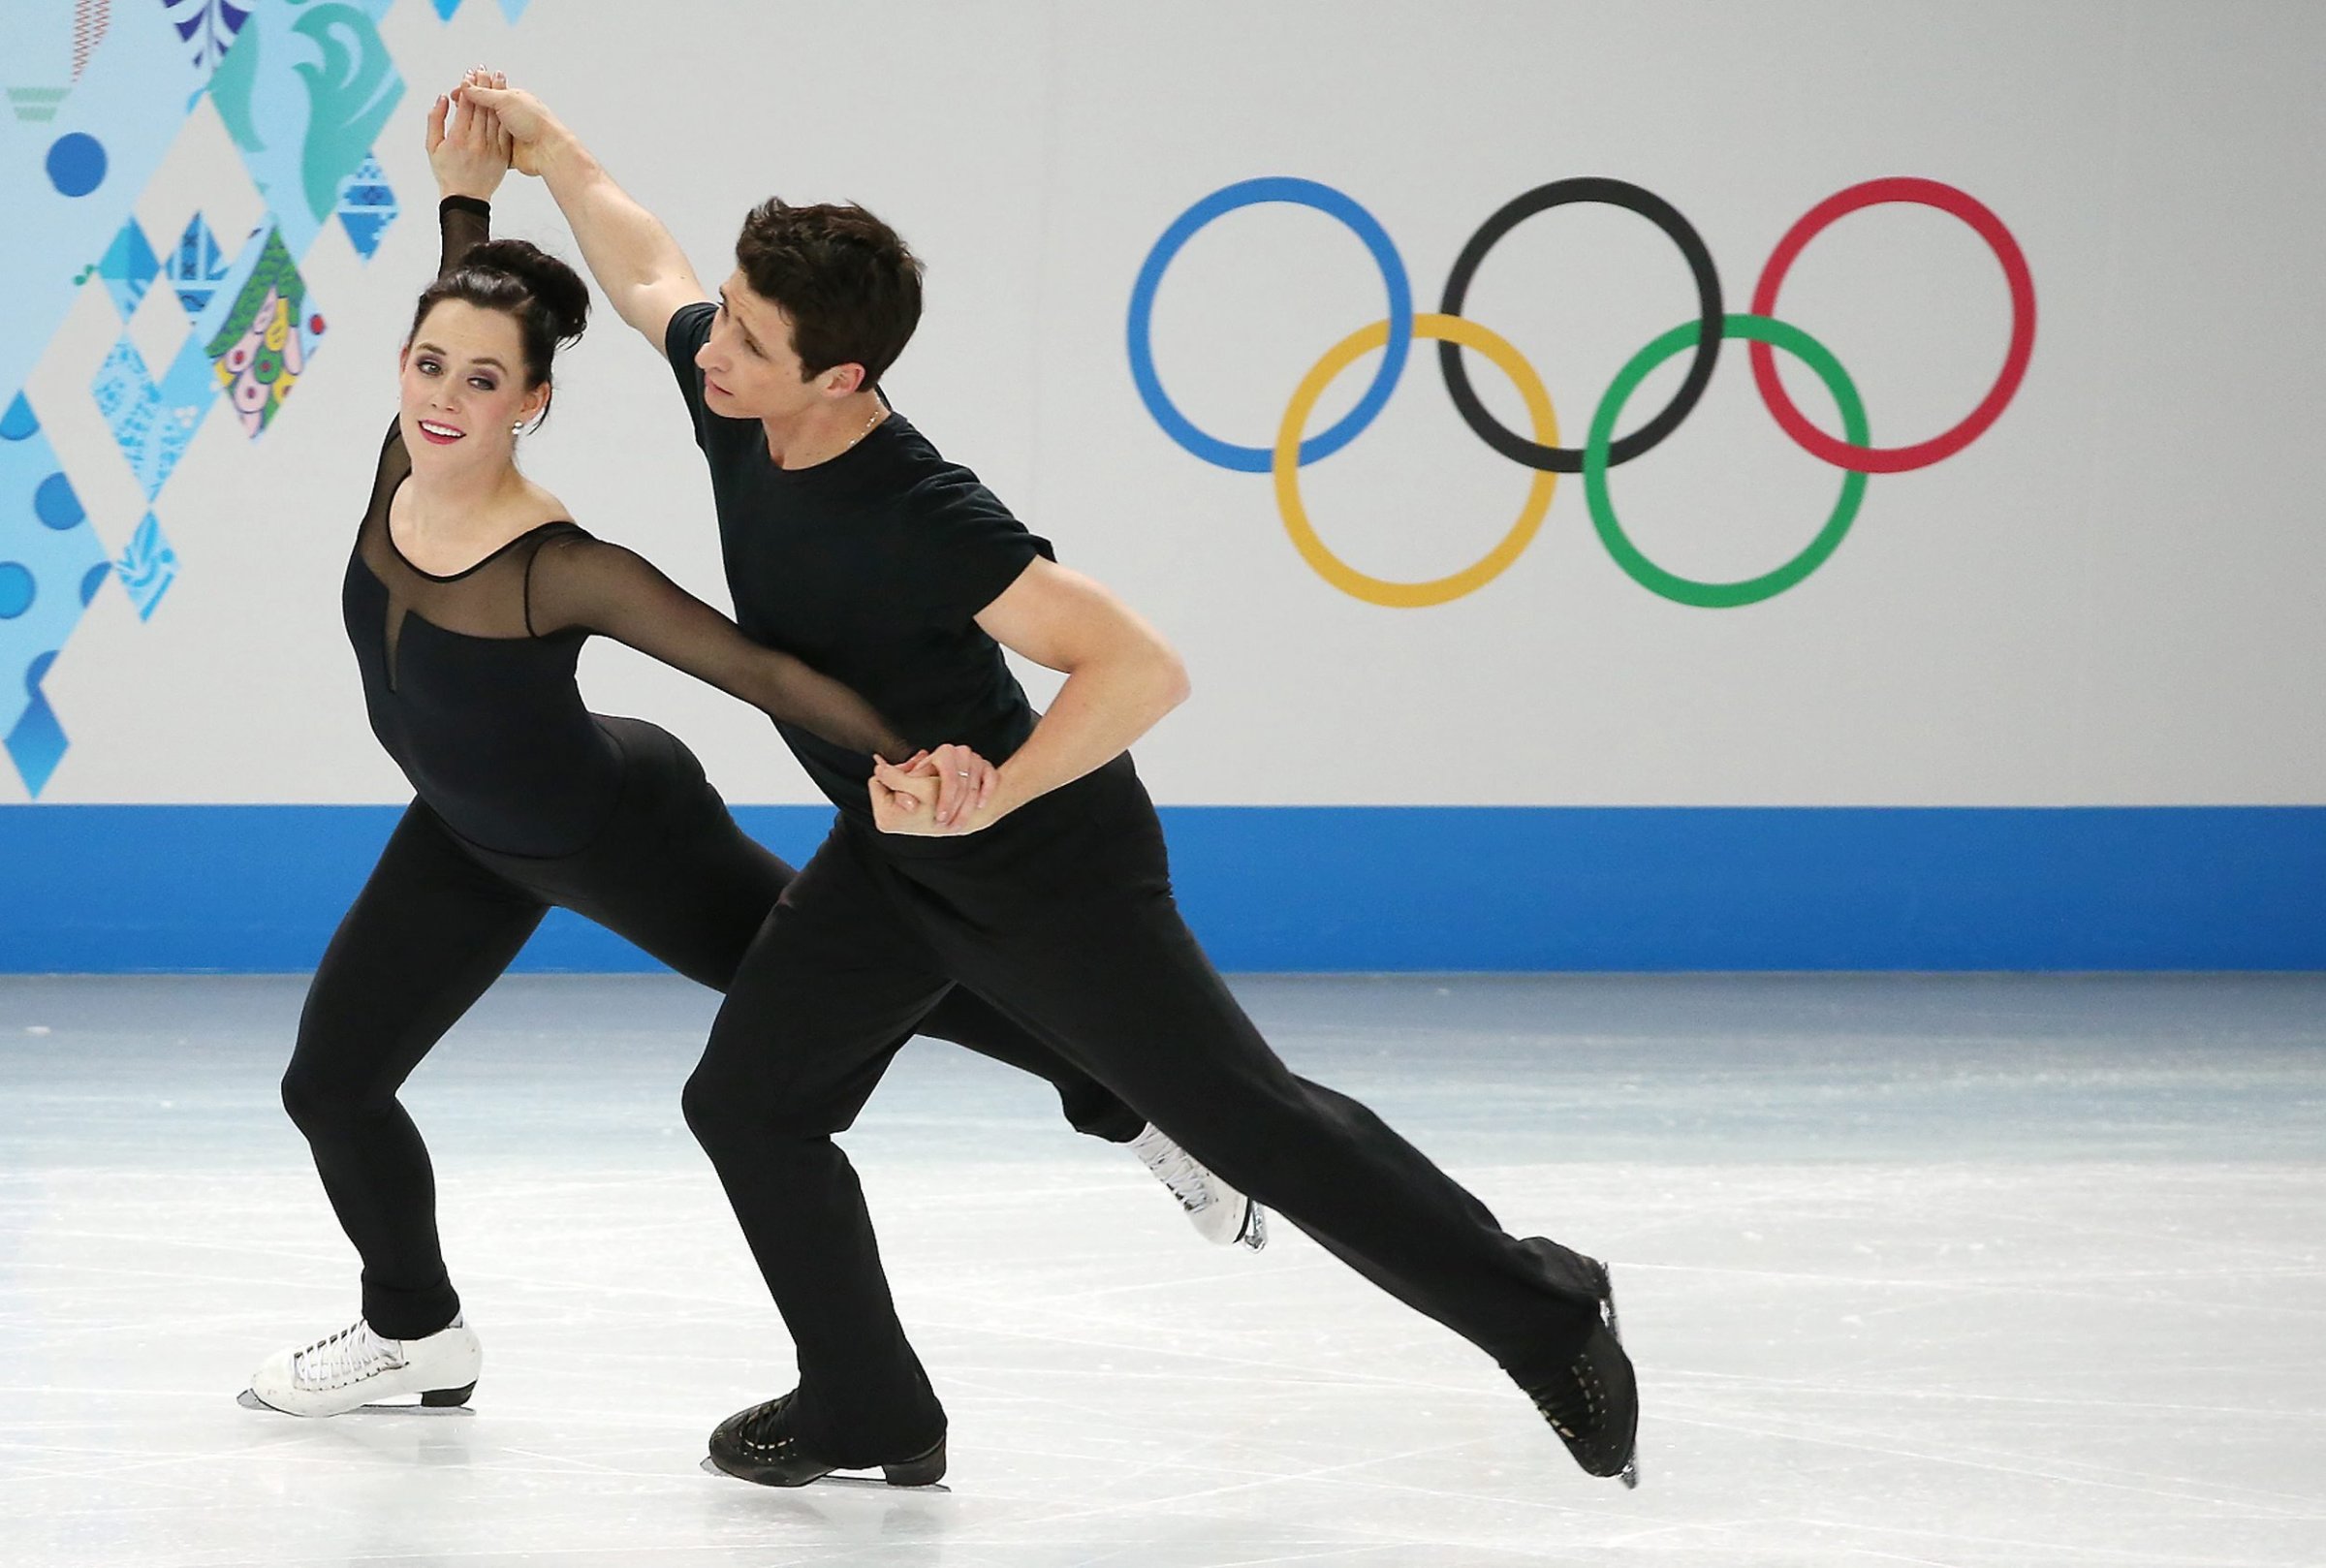 Tessa Virtue and Scott Moir of Canada perform during an ice dance figure skating training session at Iceberg Skating Palace during the Sochi 2014 Olympic Games, February 5, 2014.